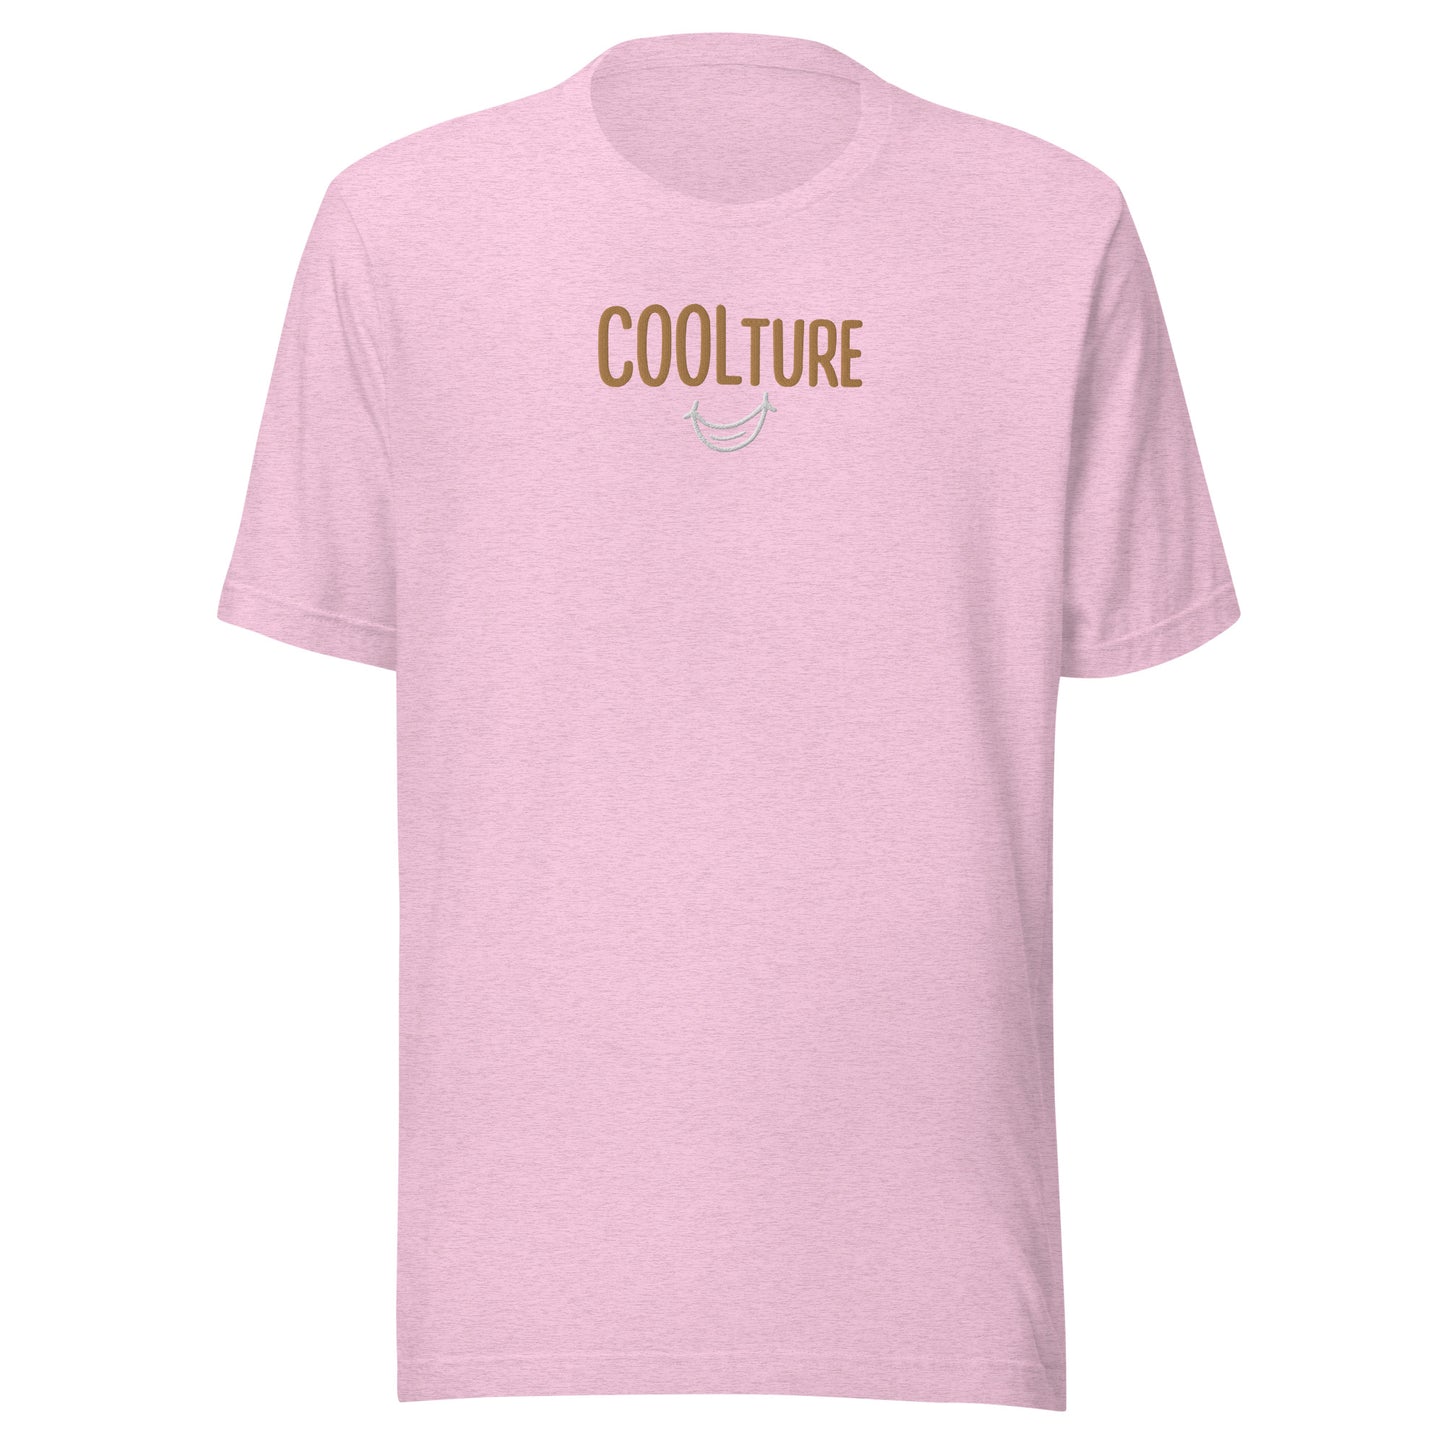 ONE Unisex Coolture T-Shirt (Traditional)